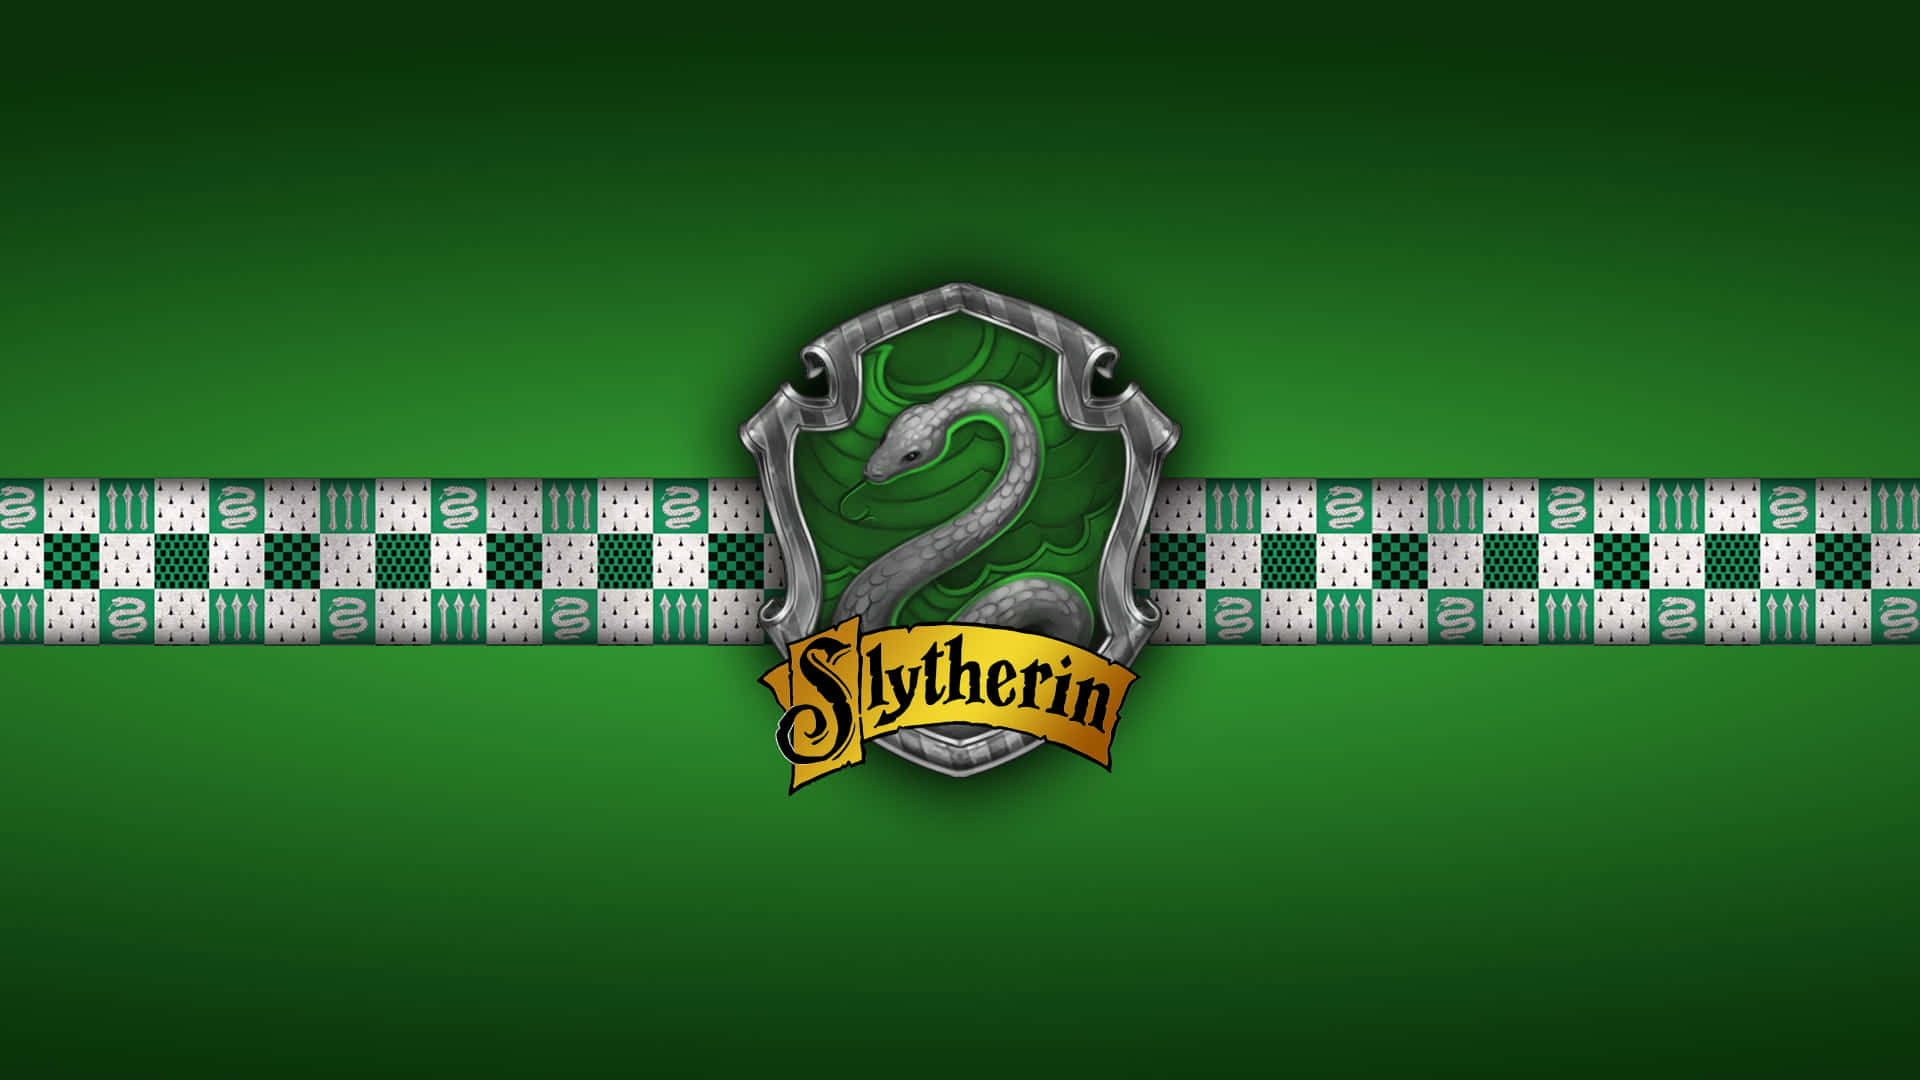 The Iconic Green and Silver of Slytherin from the Harry Potter universe